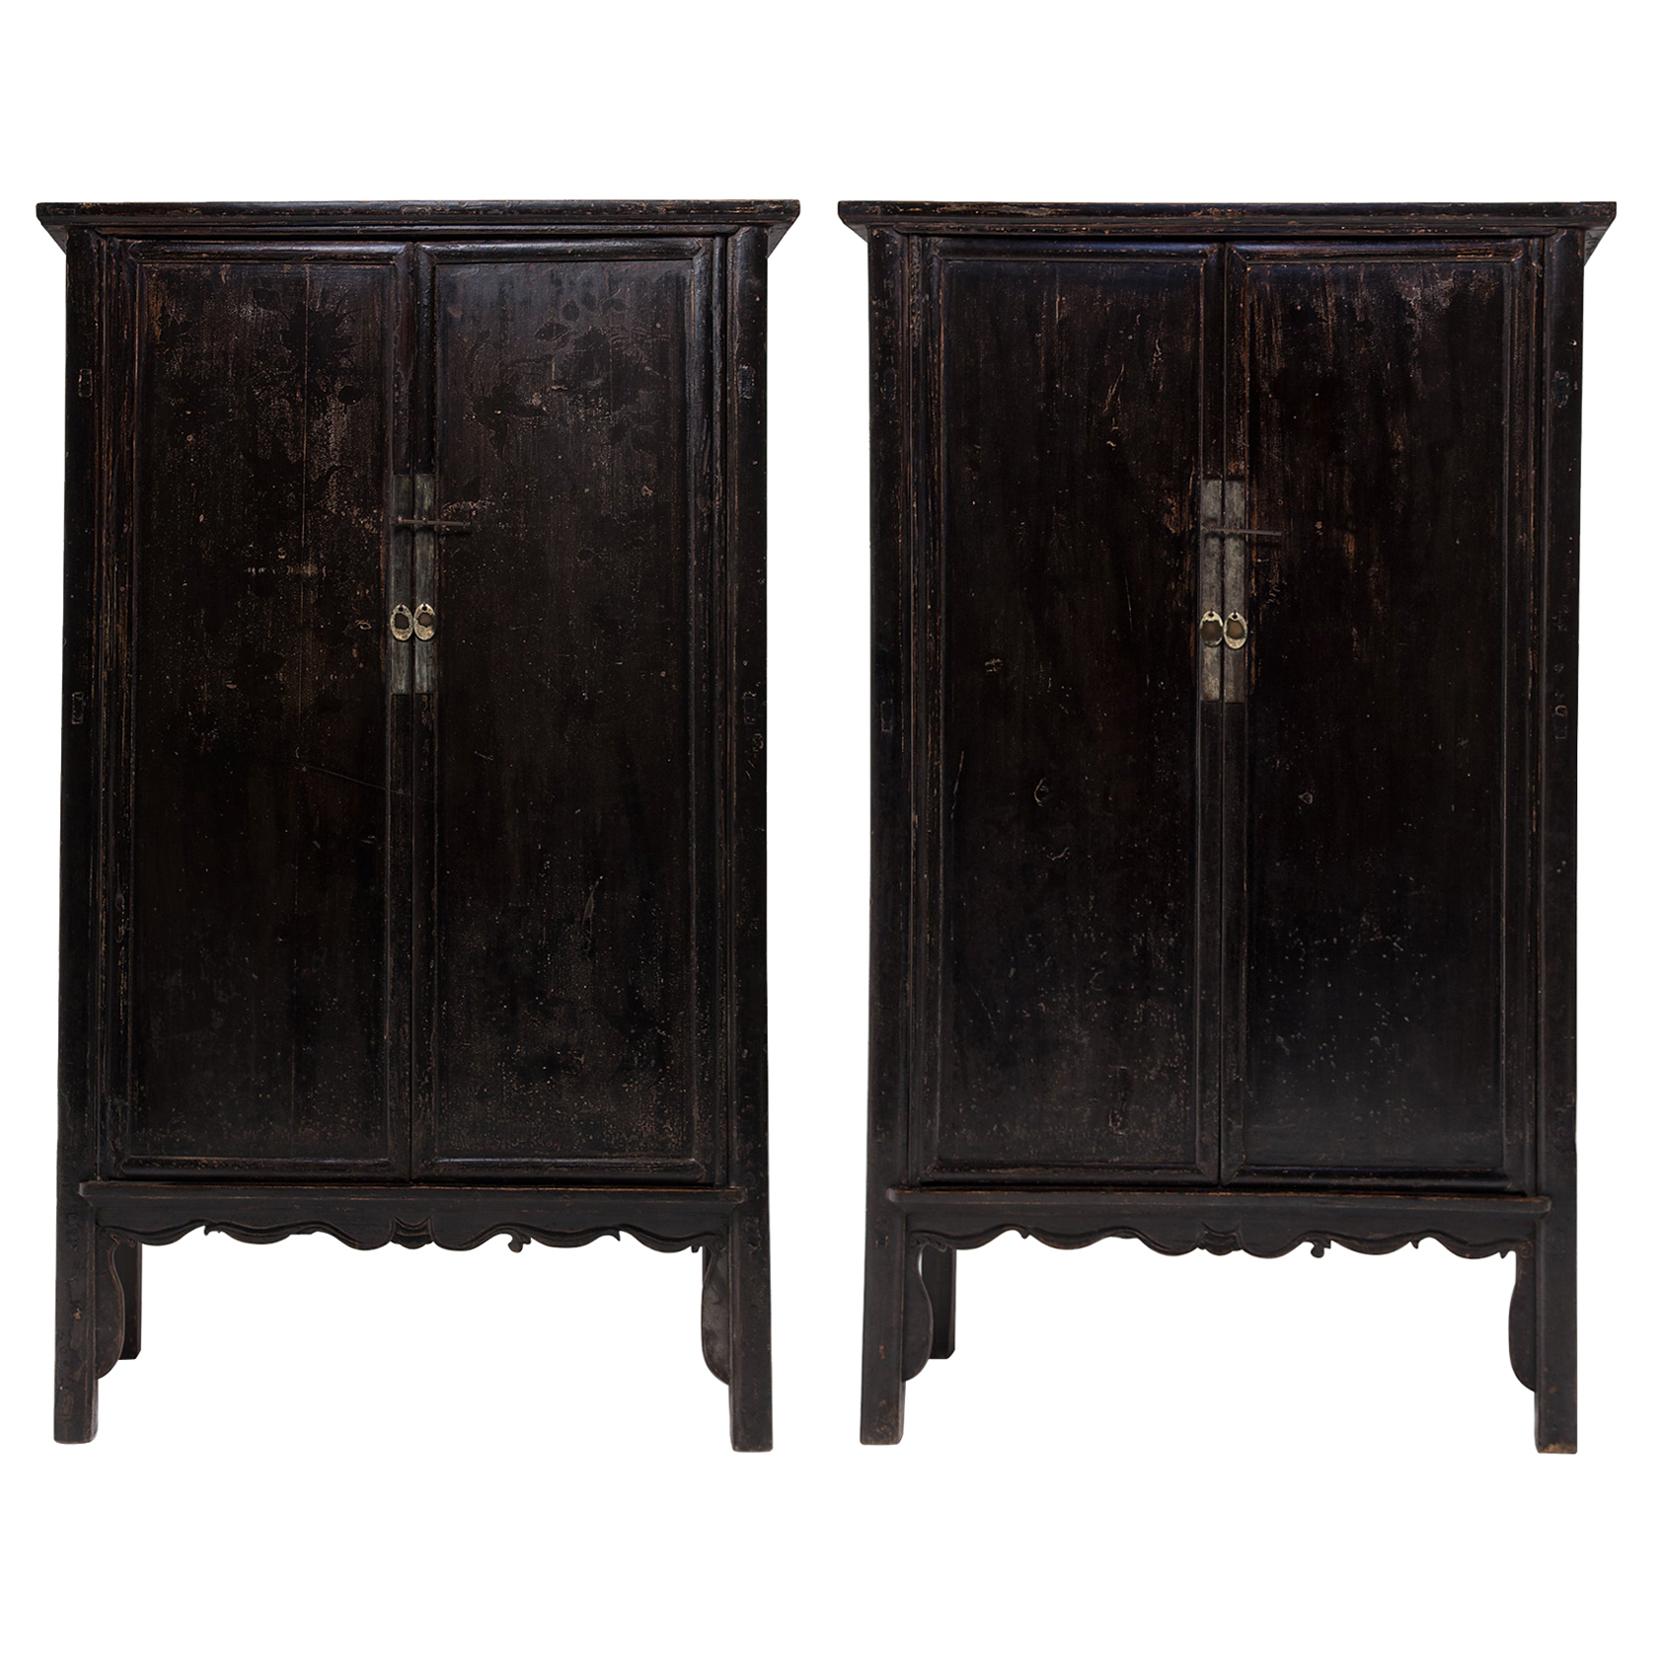 Pair of Chinese Black Lacquer Cabinets with Scalloped Aprons, c. 1800